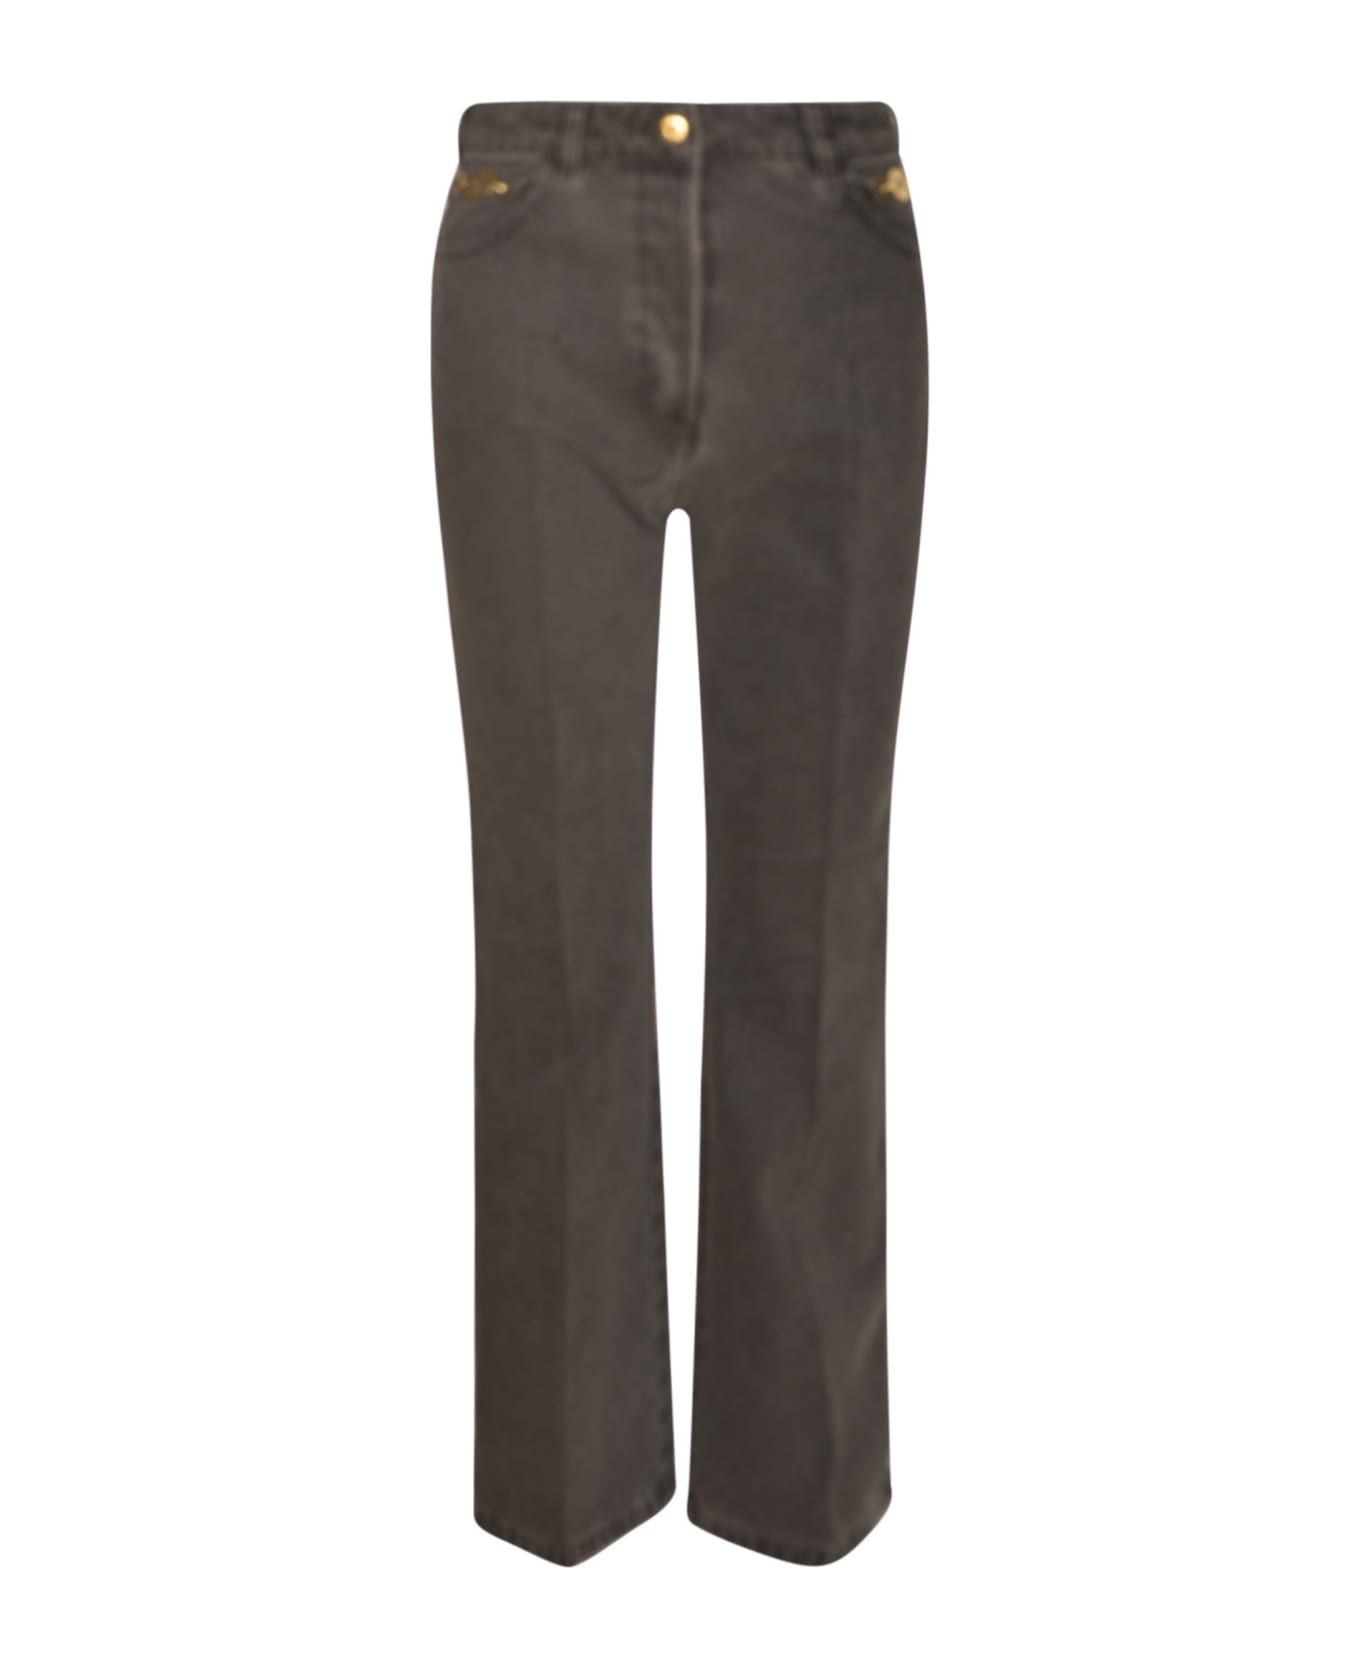 Patou Button Fitted Jeans - Anthracite